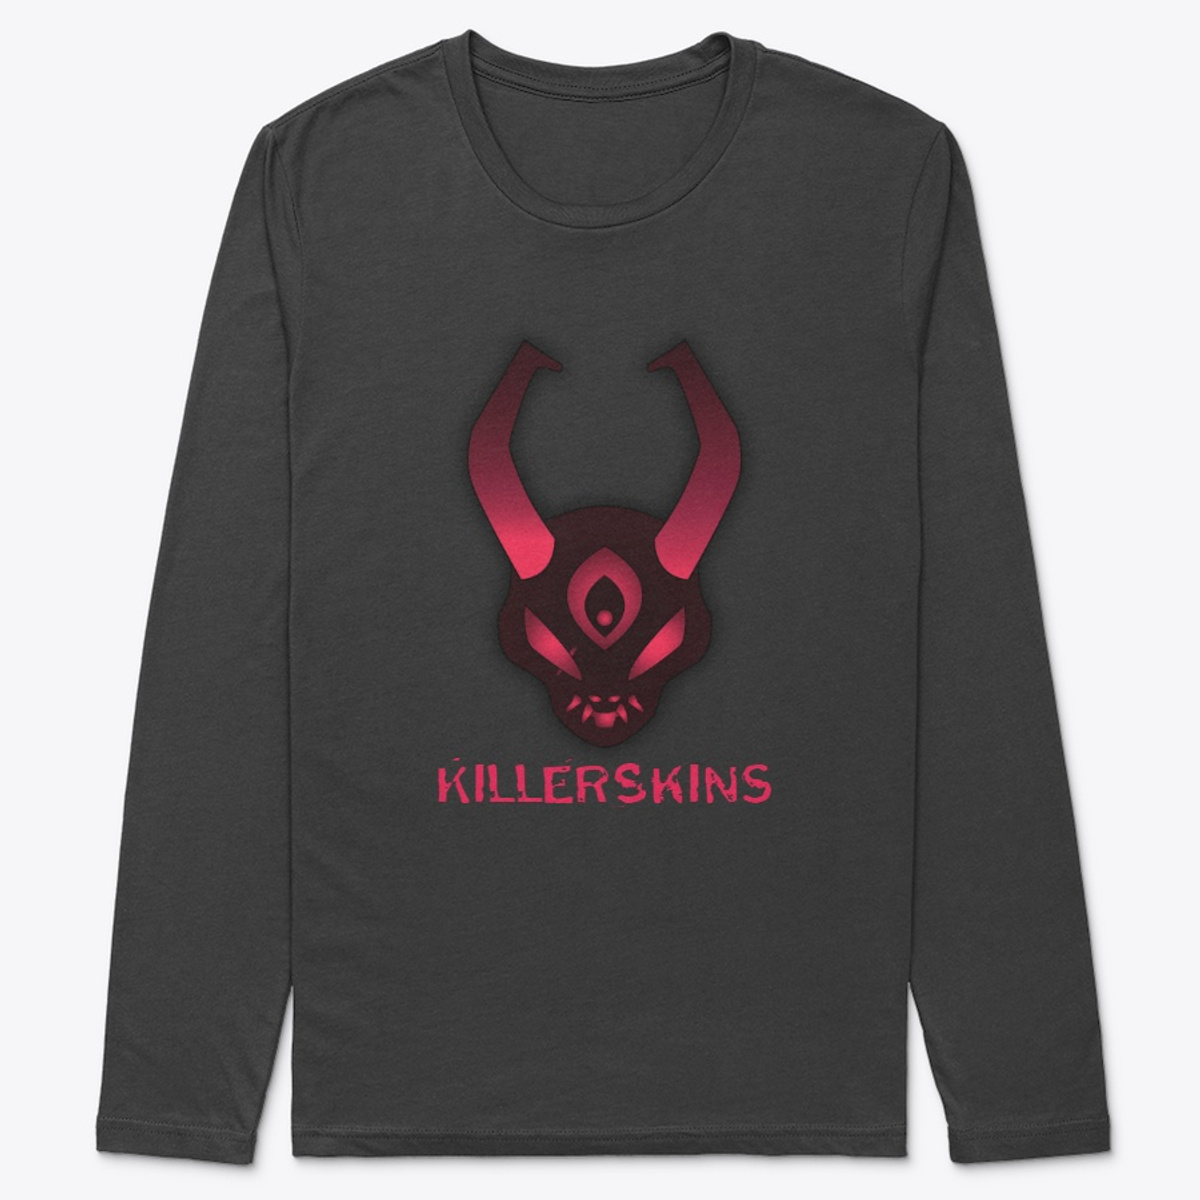 How to contribute to Killerskins - KillerSkins